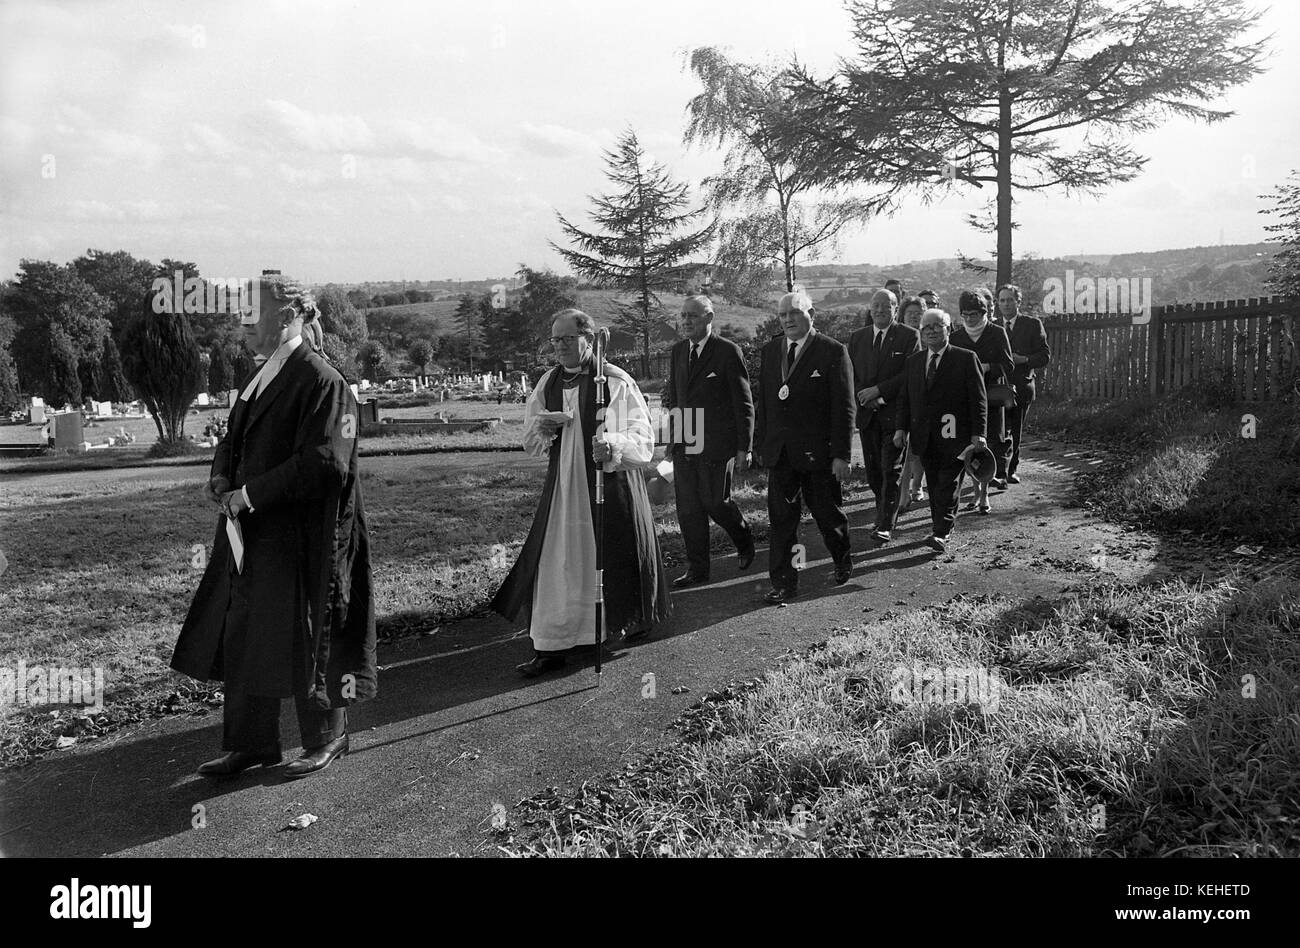 Members of the clergy and officals consecrating a burial ground on a sports field cemetery consecration service 1968 Stock Photo